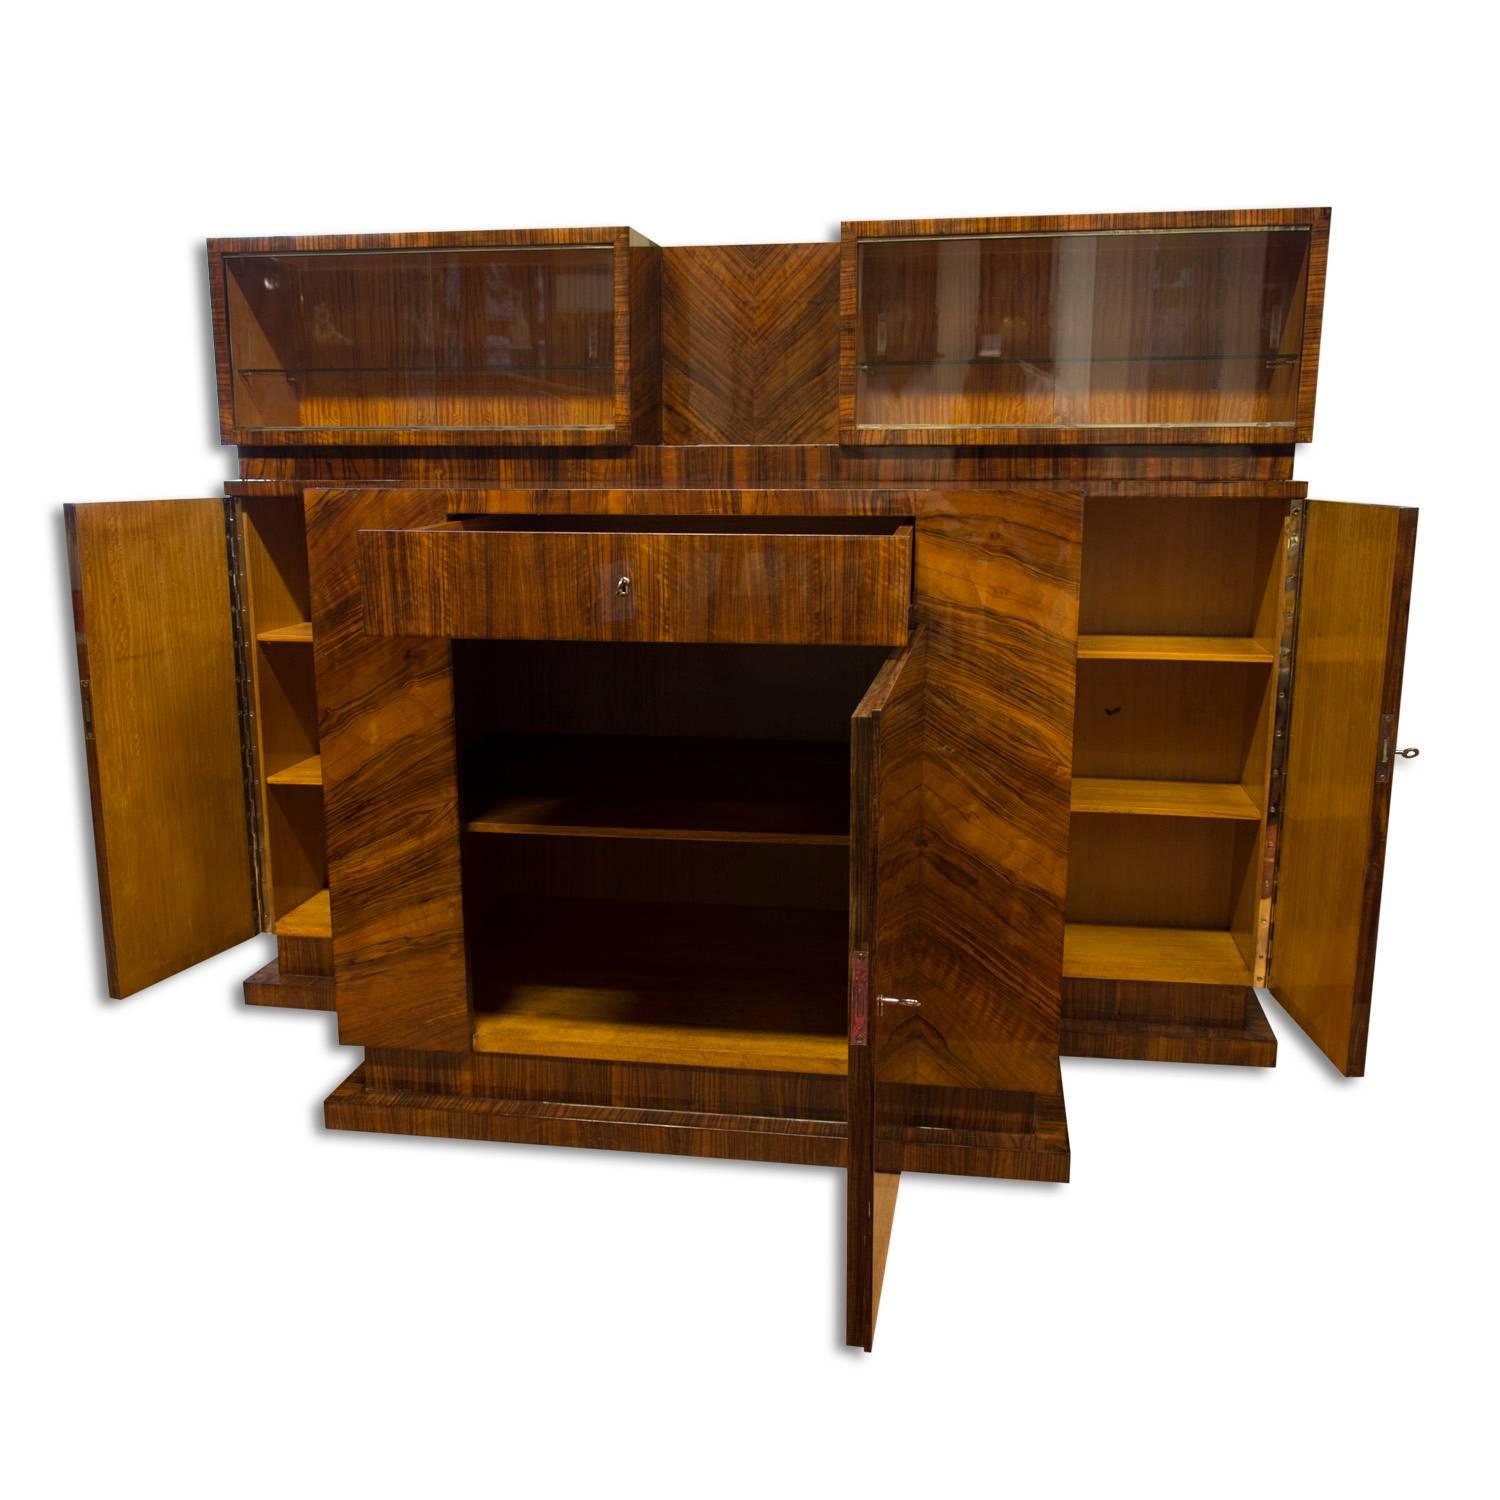 This sideboard from the 1930s was designed by Prague designer Vlastimil Brožek for his own villa. The sideboard is an example for functionalism and is made from wood and veneered walnut. It´s in excellent condition due to a complete renovation with